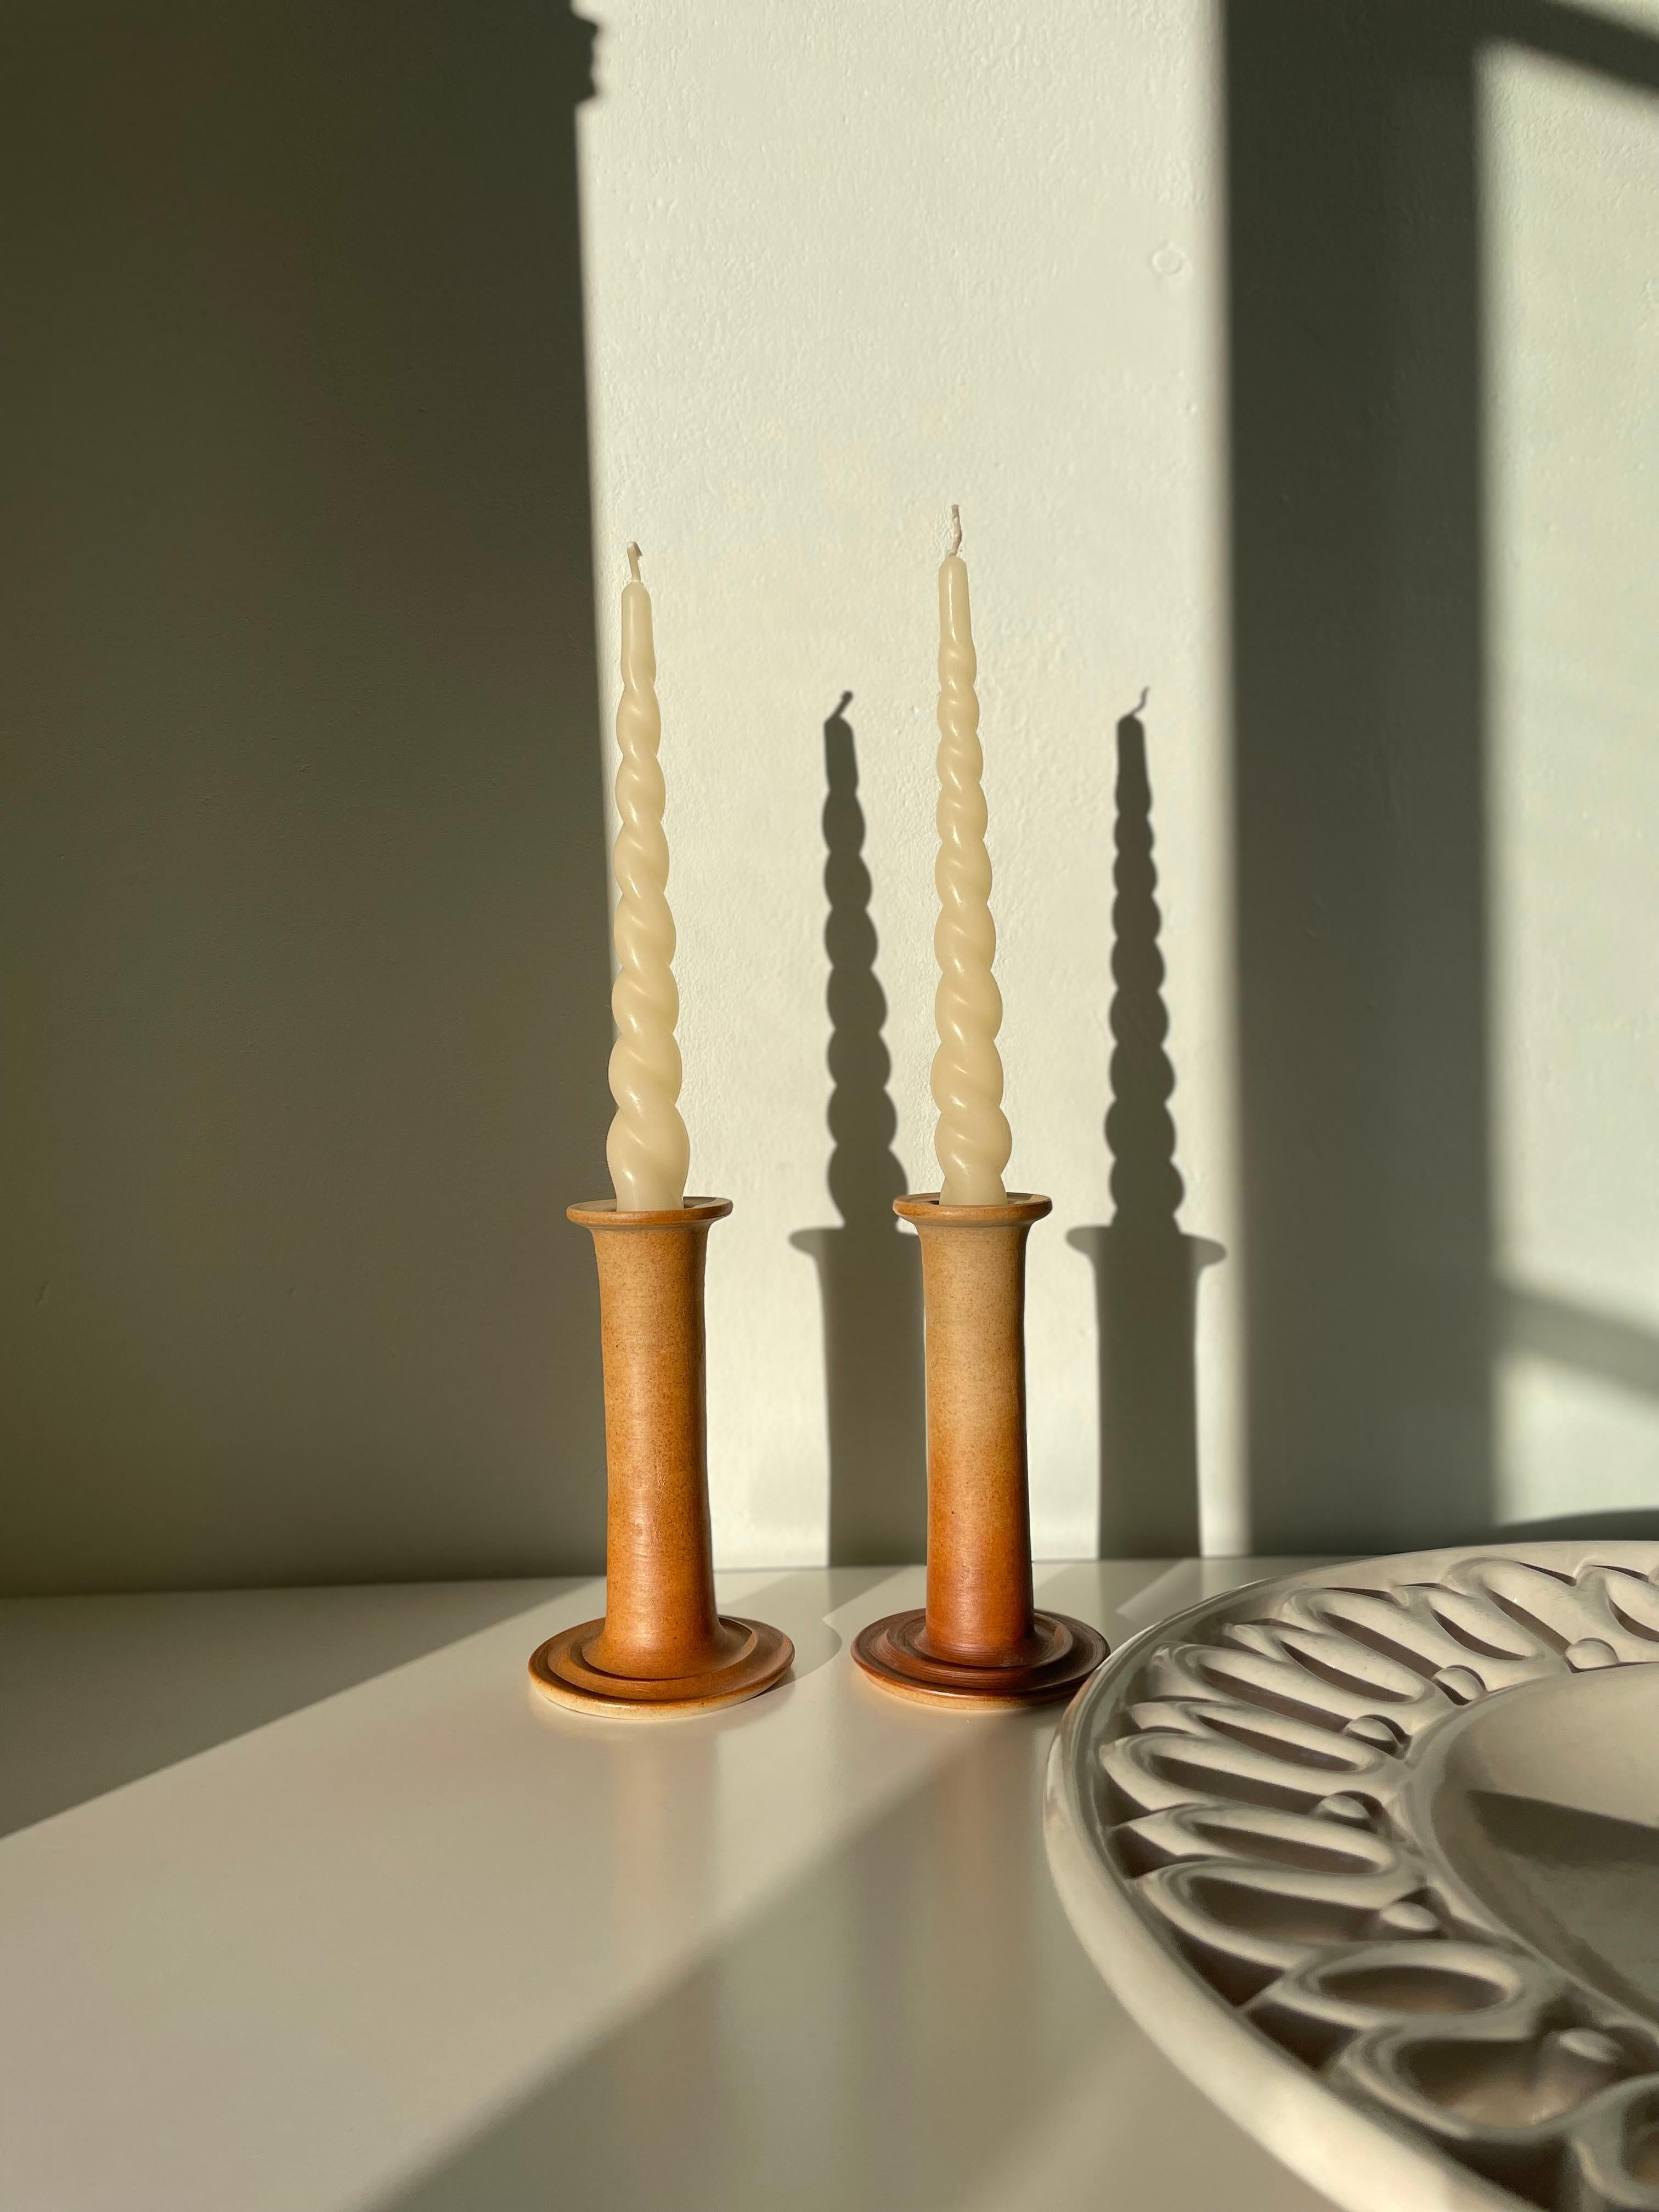 Glazed Pair of J. Packness Tawny Ceramic Candle Sticks, 1970s For Sale